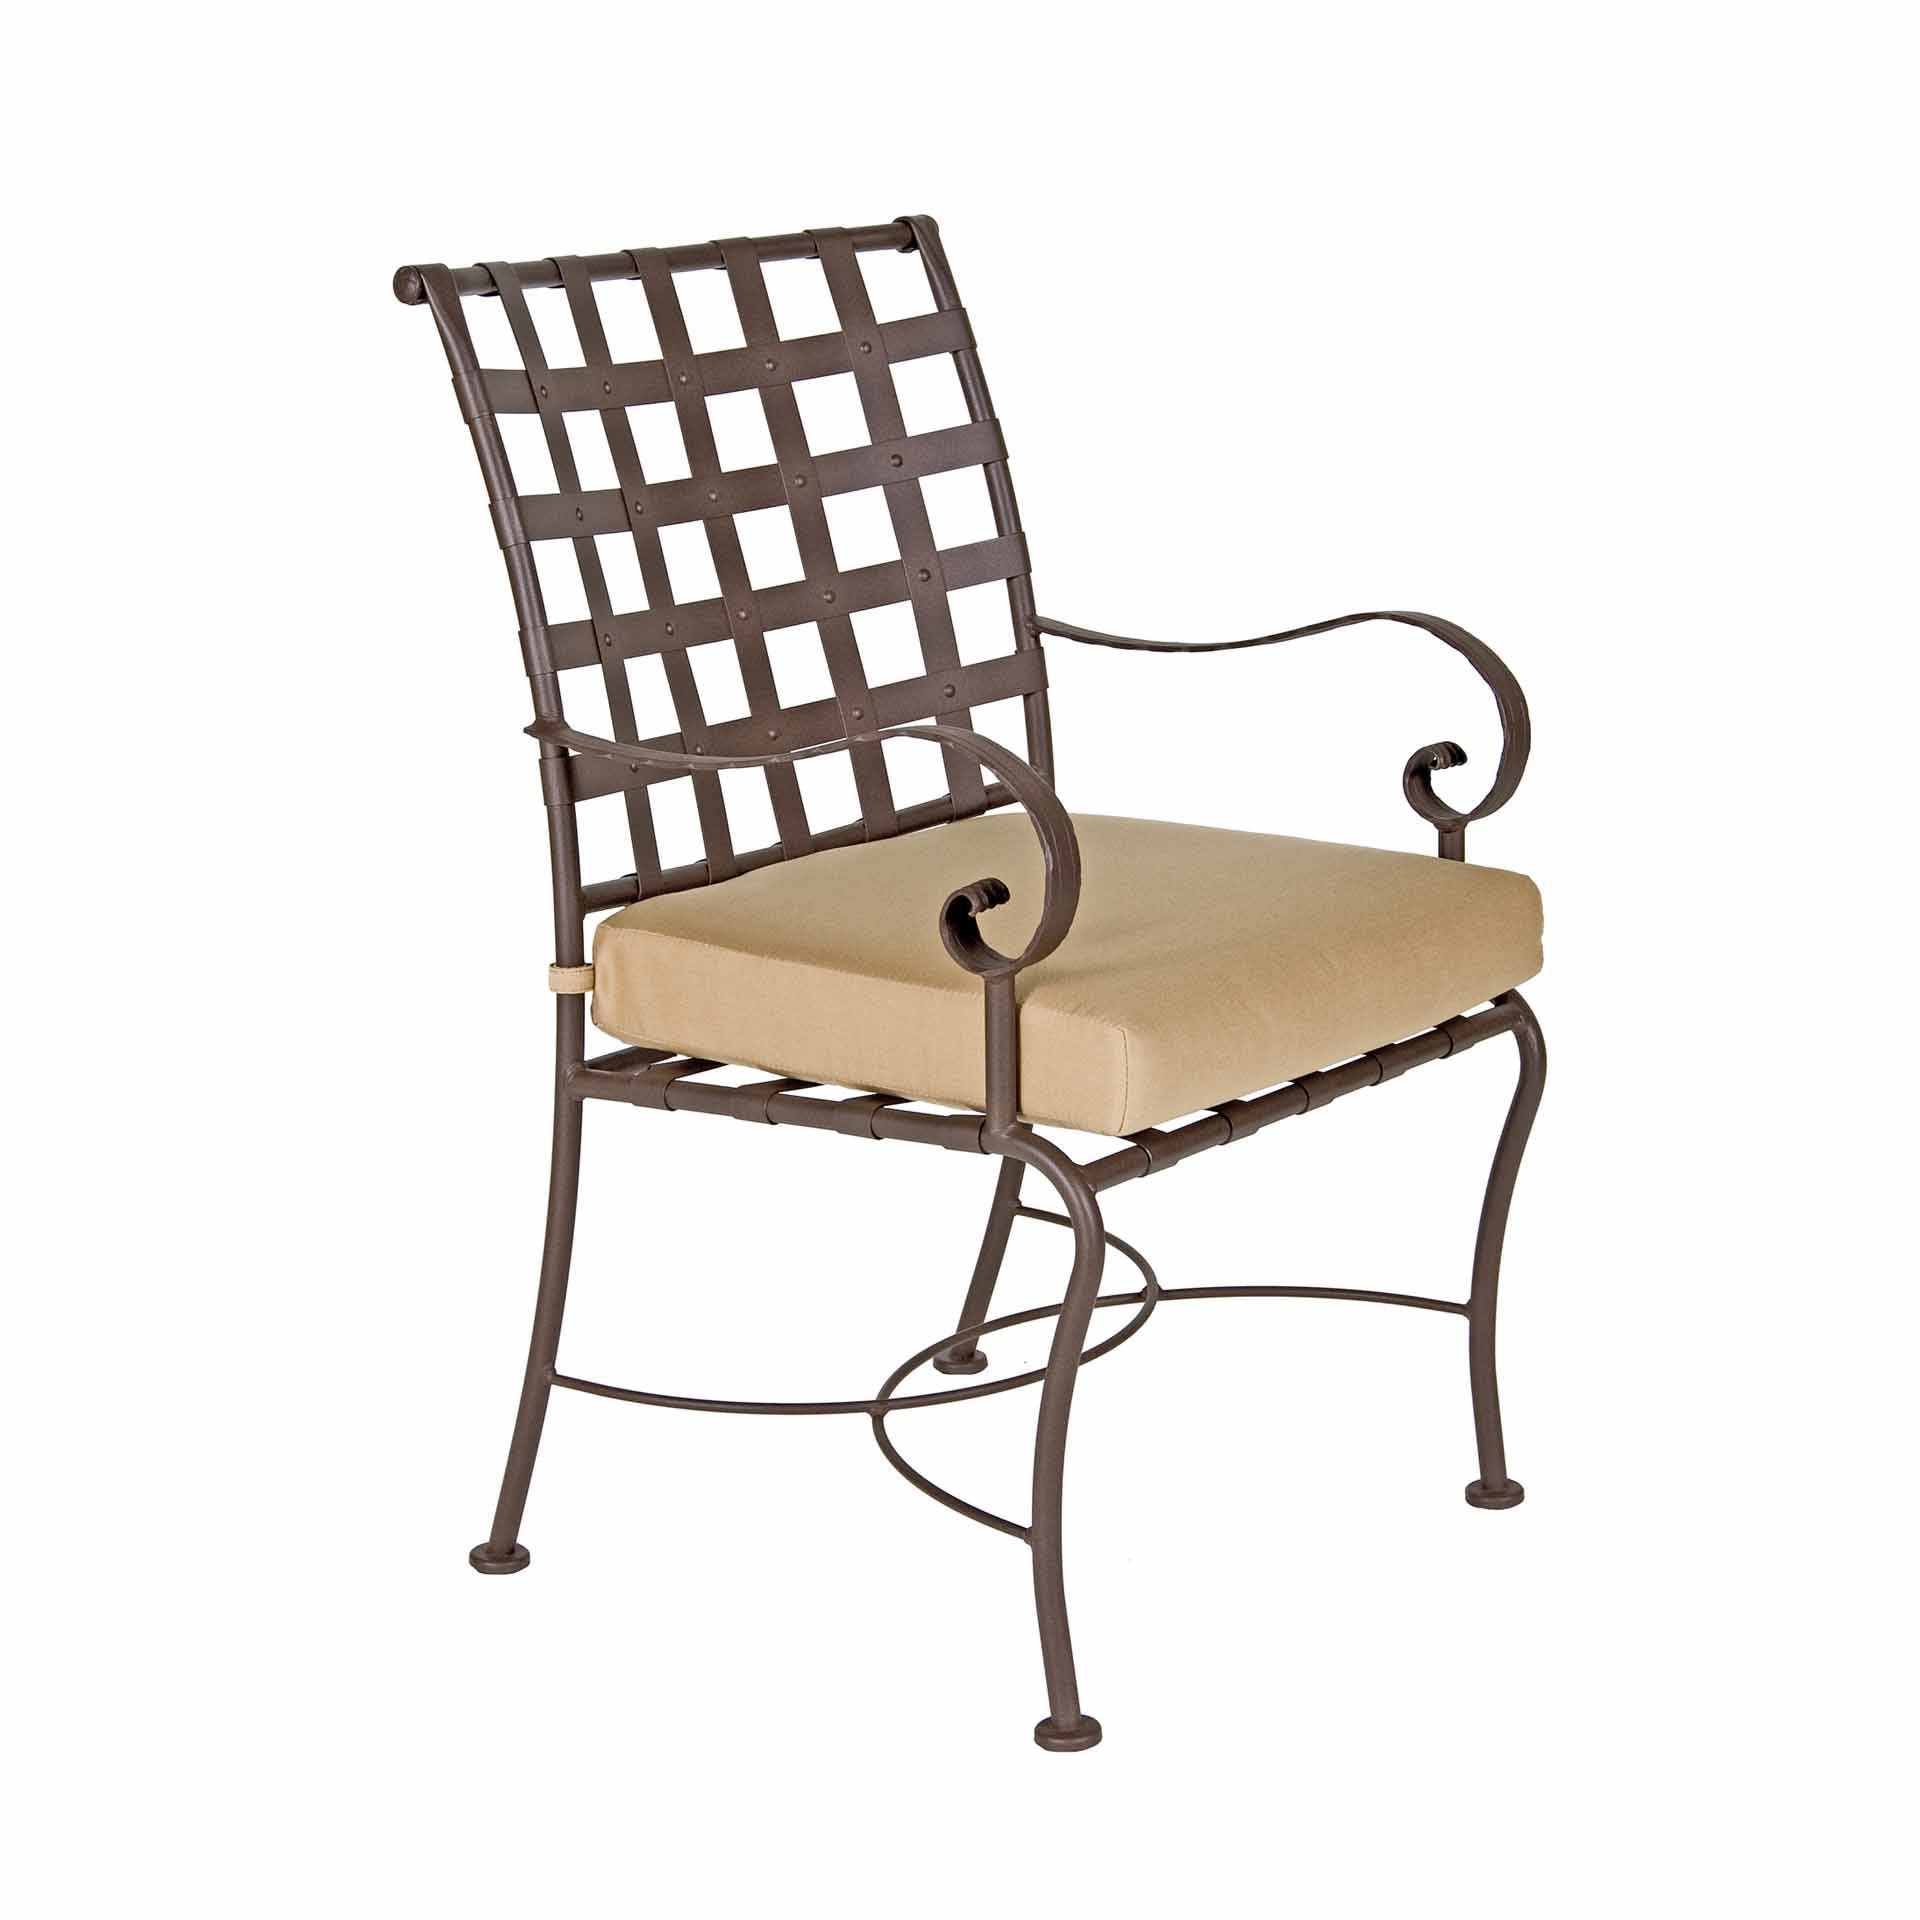 Ow Lee Classico Dining Arm Chair Leisure Living